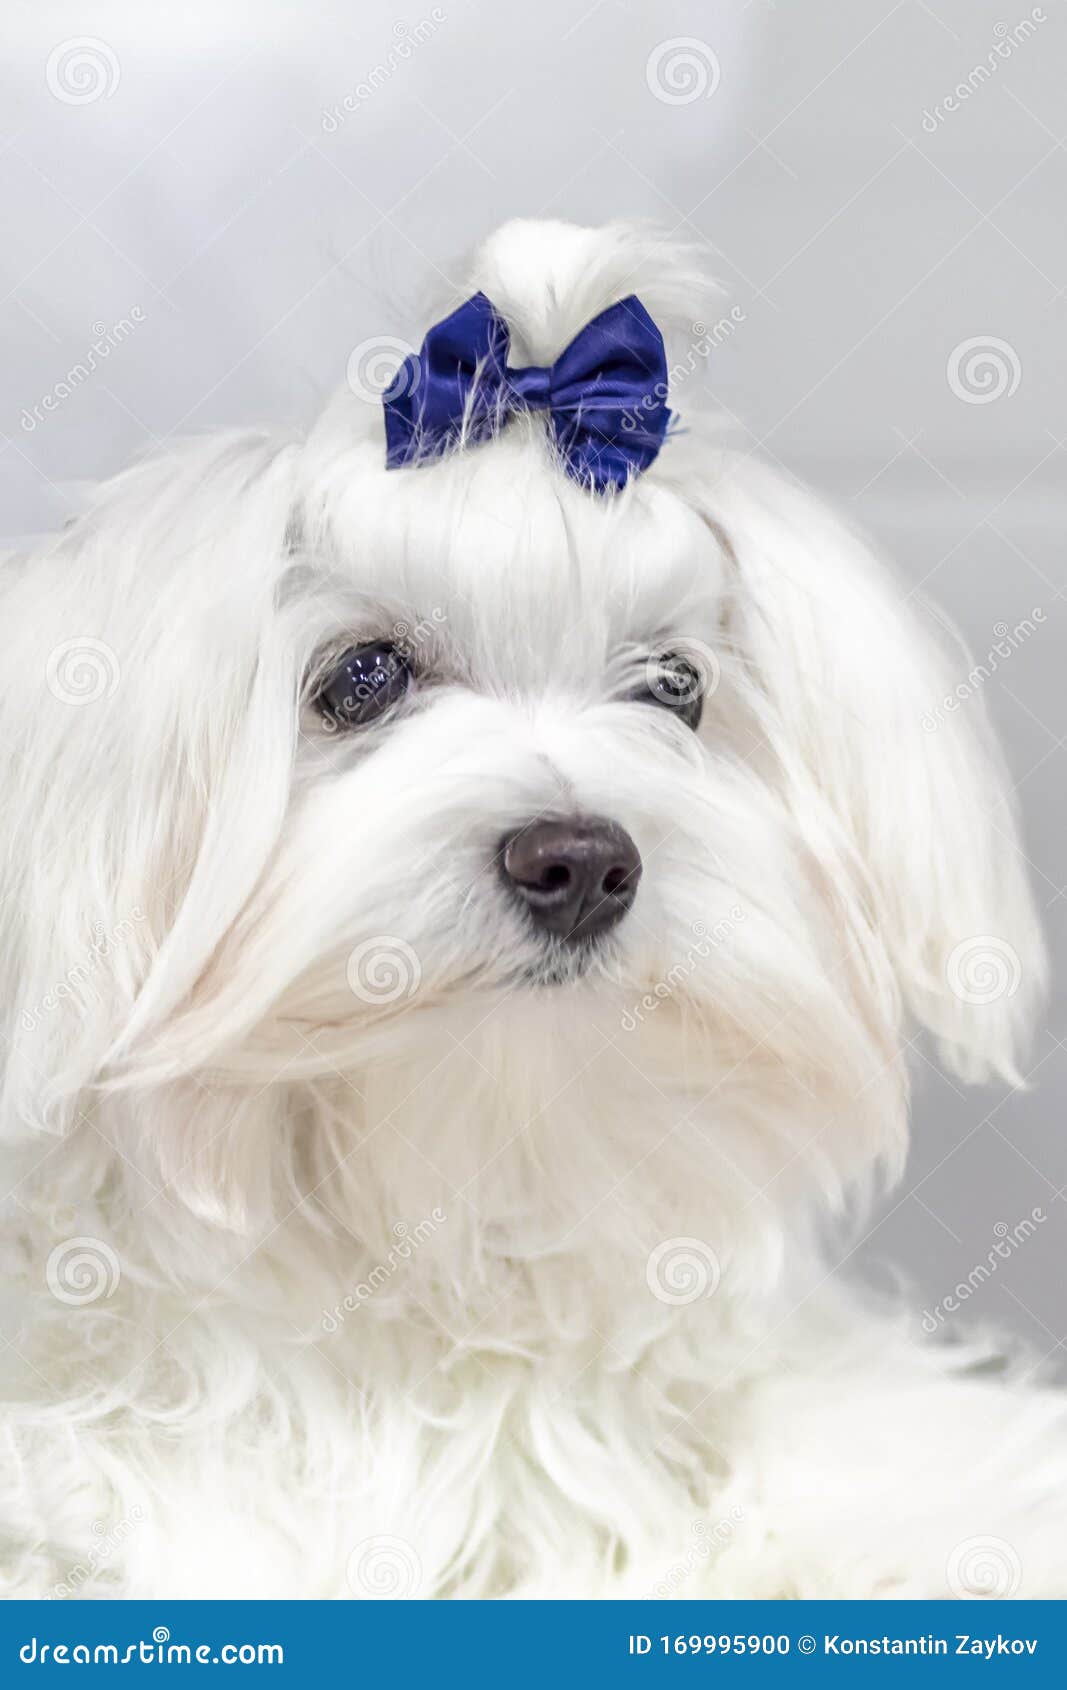 Portrait Maltese Lapdog with Blue Bow on His Head. Close-up Portrait Small  White Dog with Long Hair Stock Photo - Image of closeup, close: 169995900